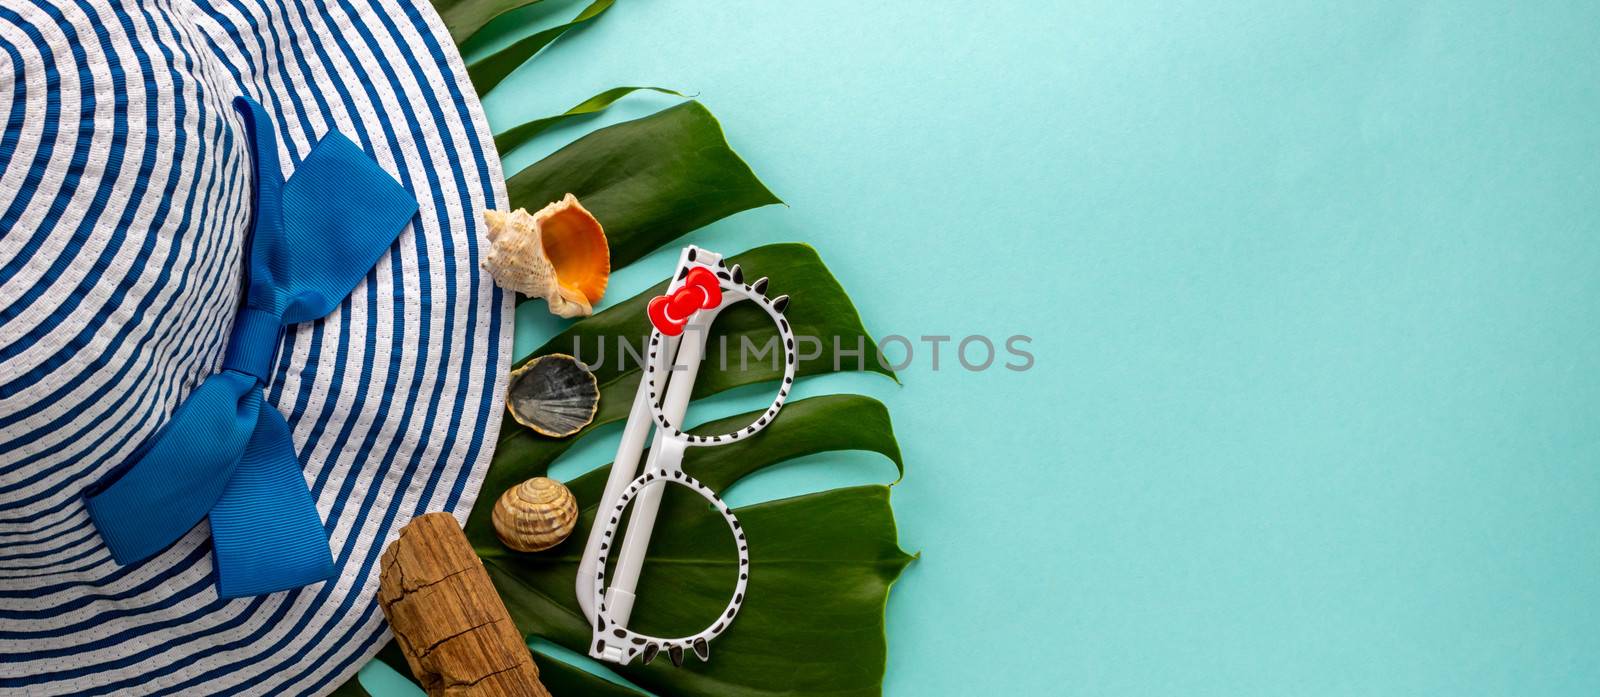 Striped hat, sunglasses, seashells, tropical monstera leaves on a blue background.